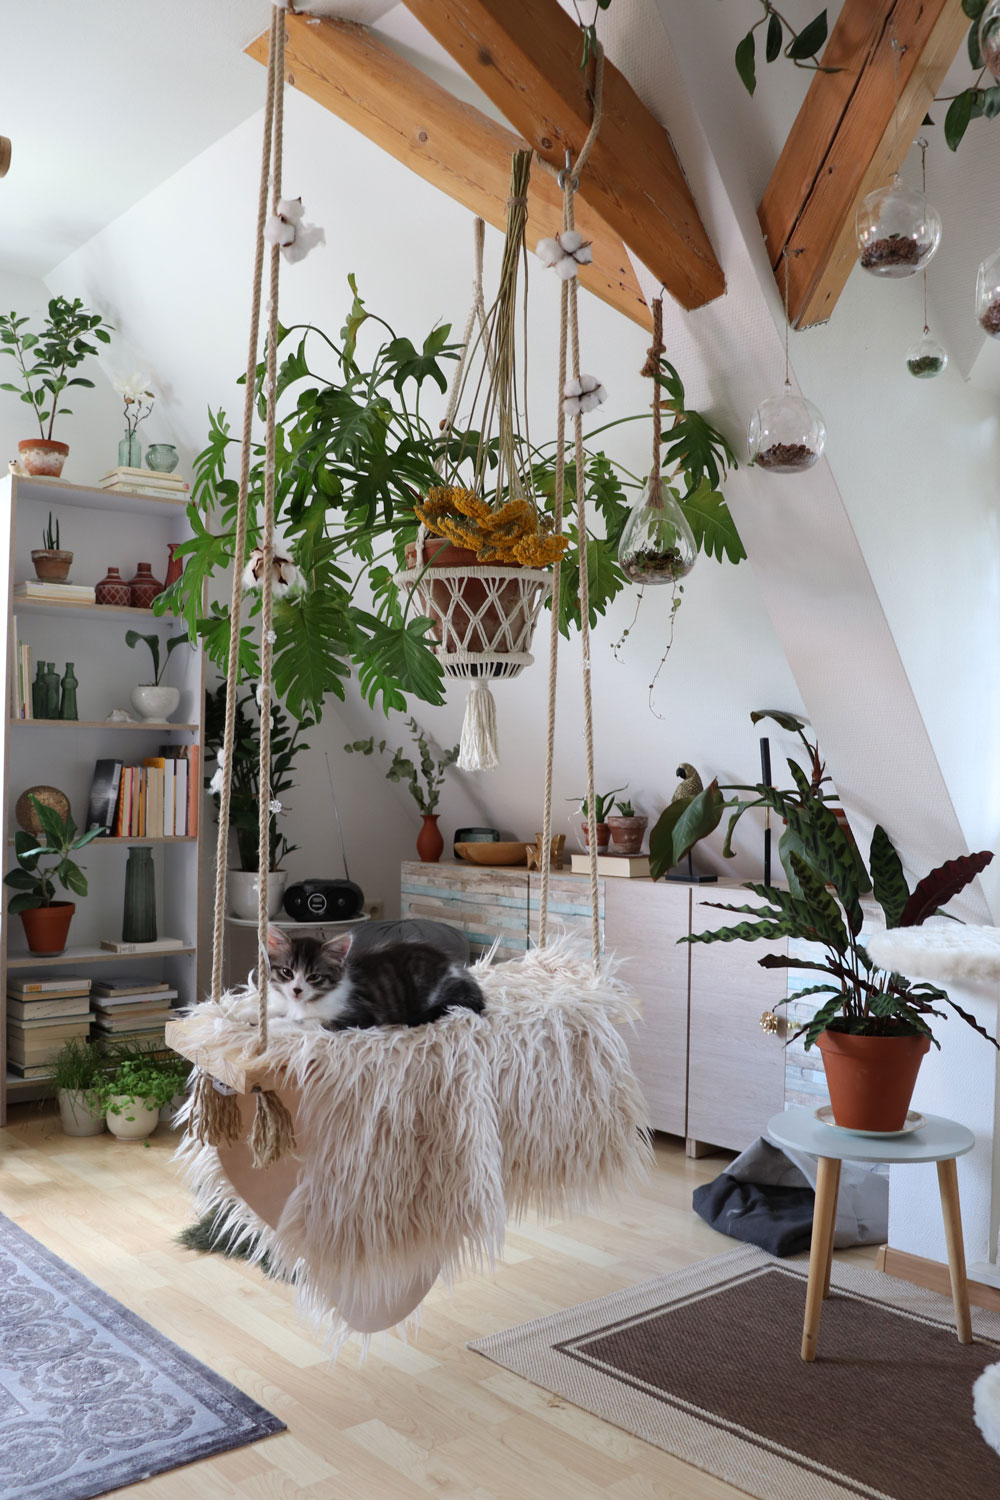 DIY-indoor-swing-hanging-on-loft-beems-and-a-little-happy-cat-fagusurban-submission